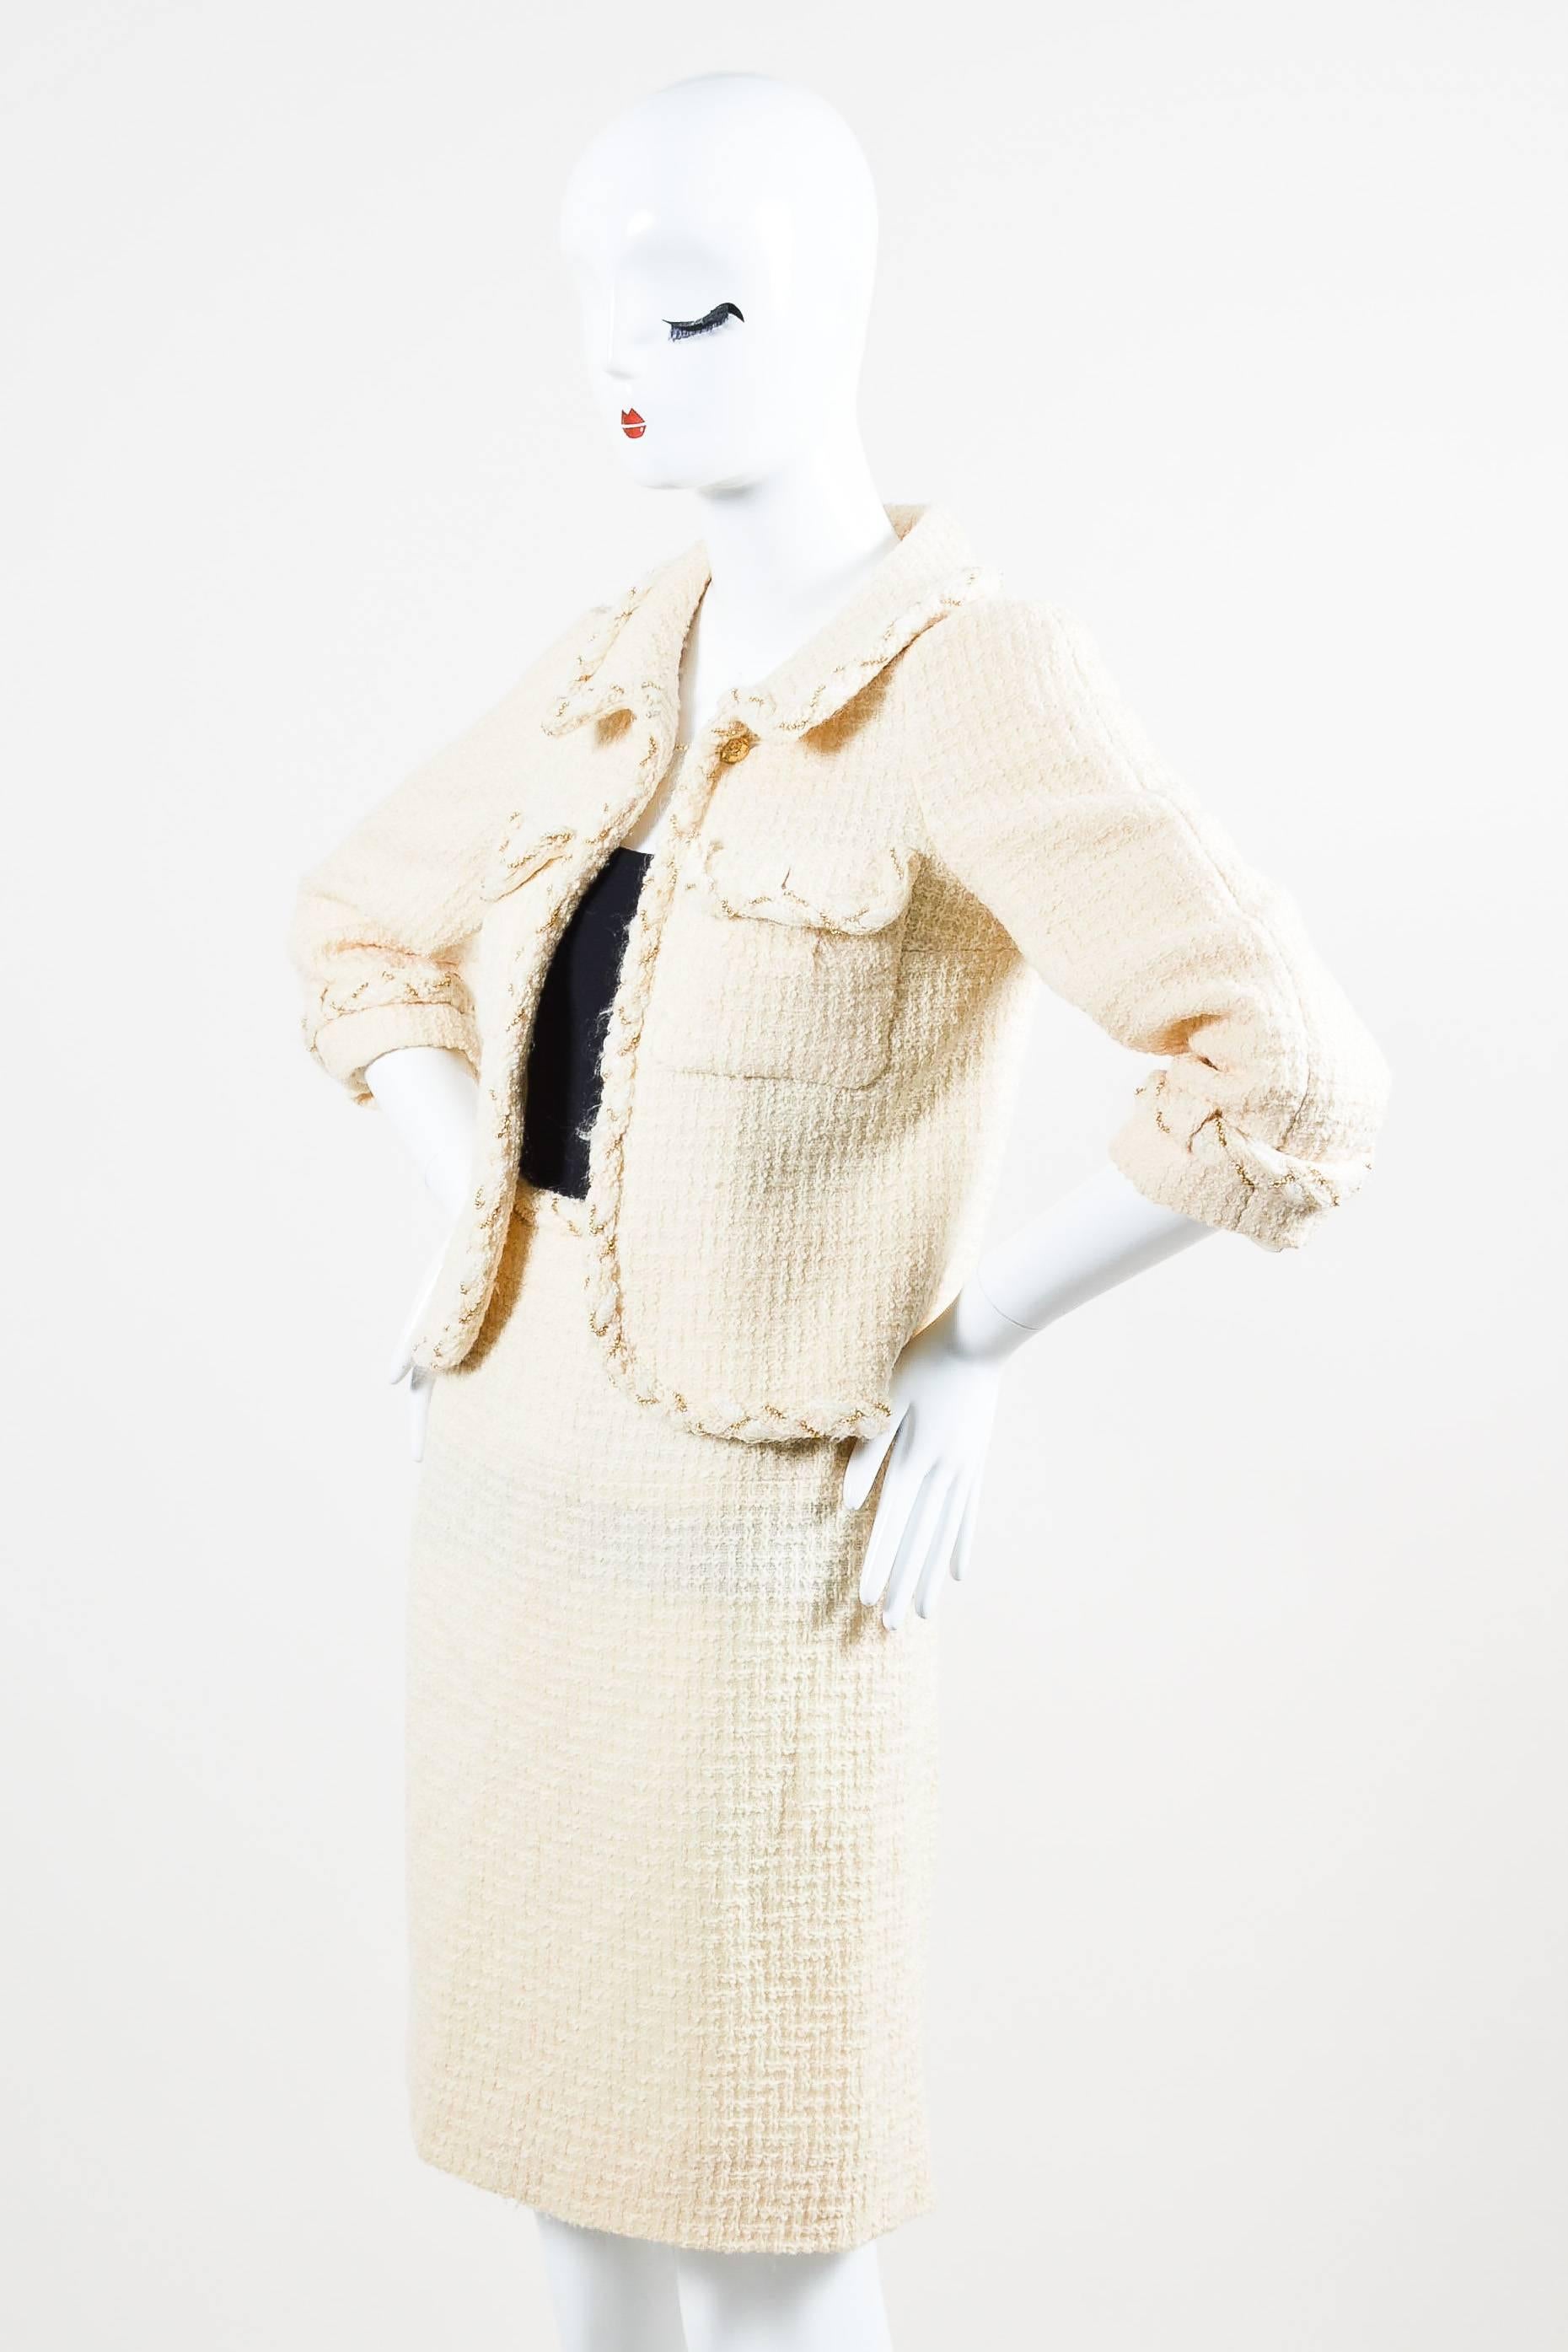 Two piece set comes with matching cream tweed jacket and pencil skirt. Jacket has two button flap pockets on front and cropped sleeves. Single pull through button closure below the collar. Pencil skirt has two buttons in back that can be used to